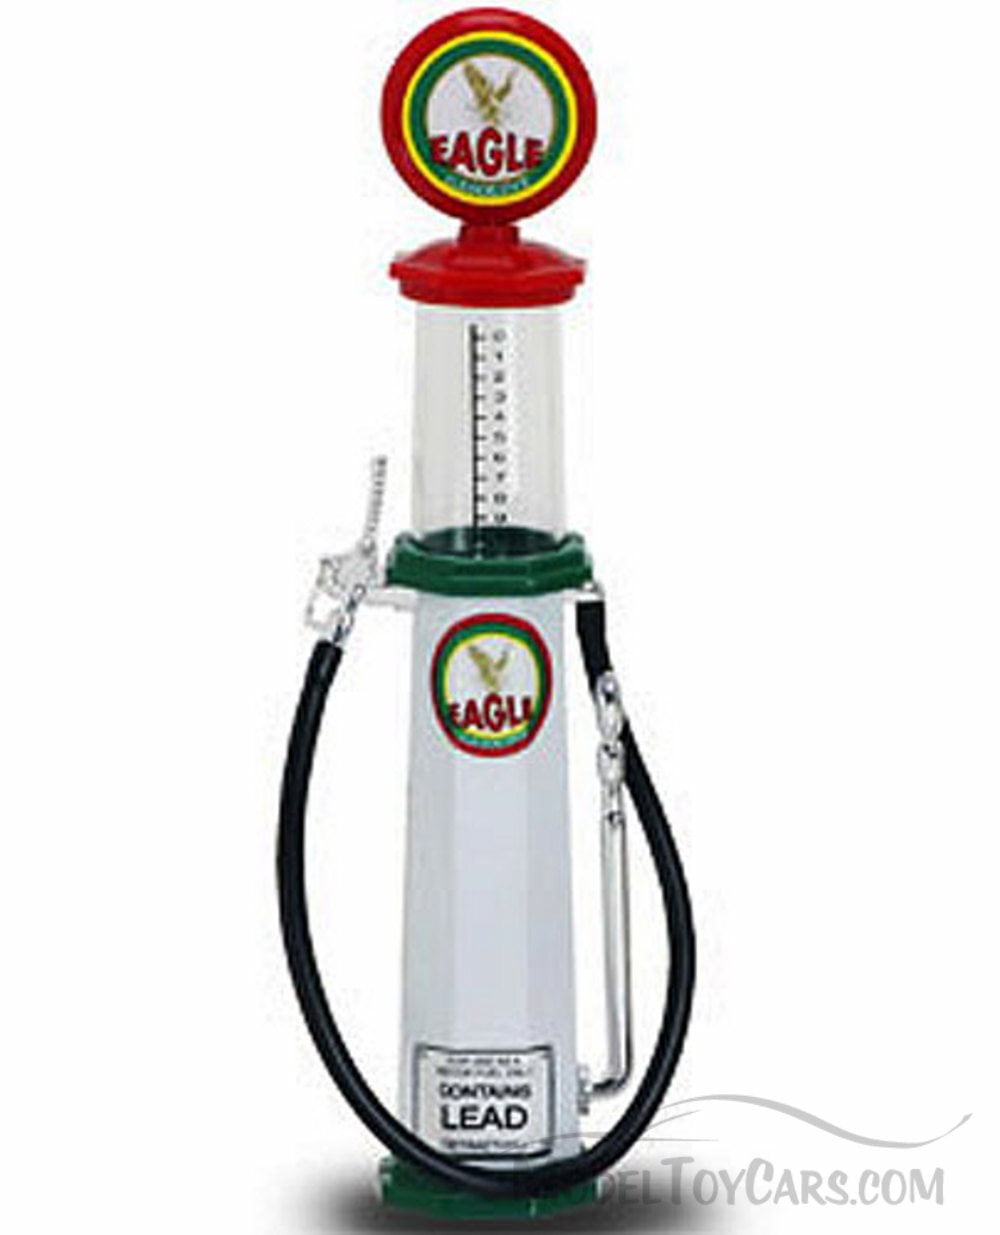 Yat Ming 1/18 Replica 1930s Gas Pump Eagle Petrol Diecast BOXED COLLECTABLE